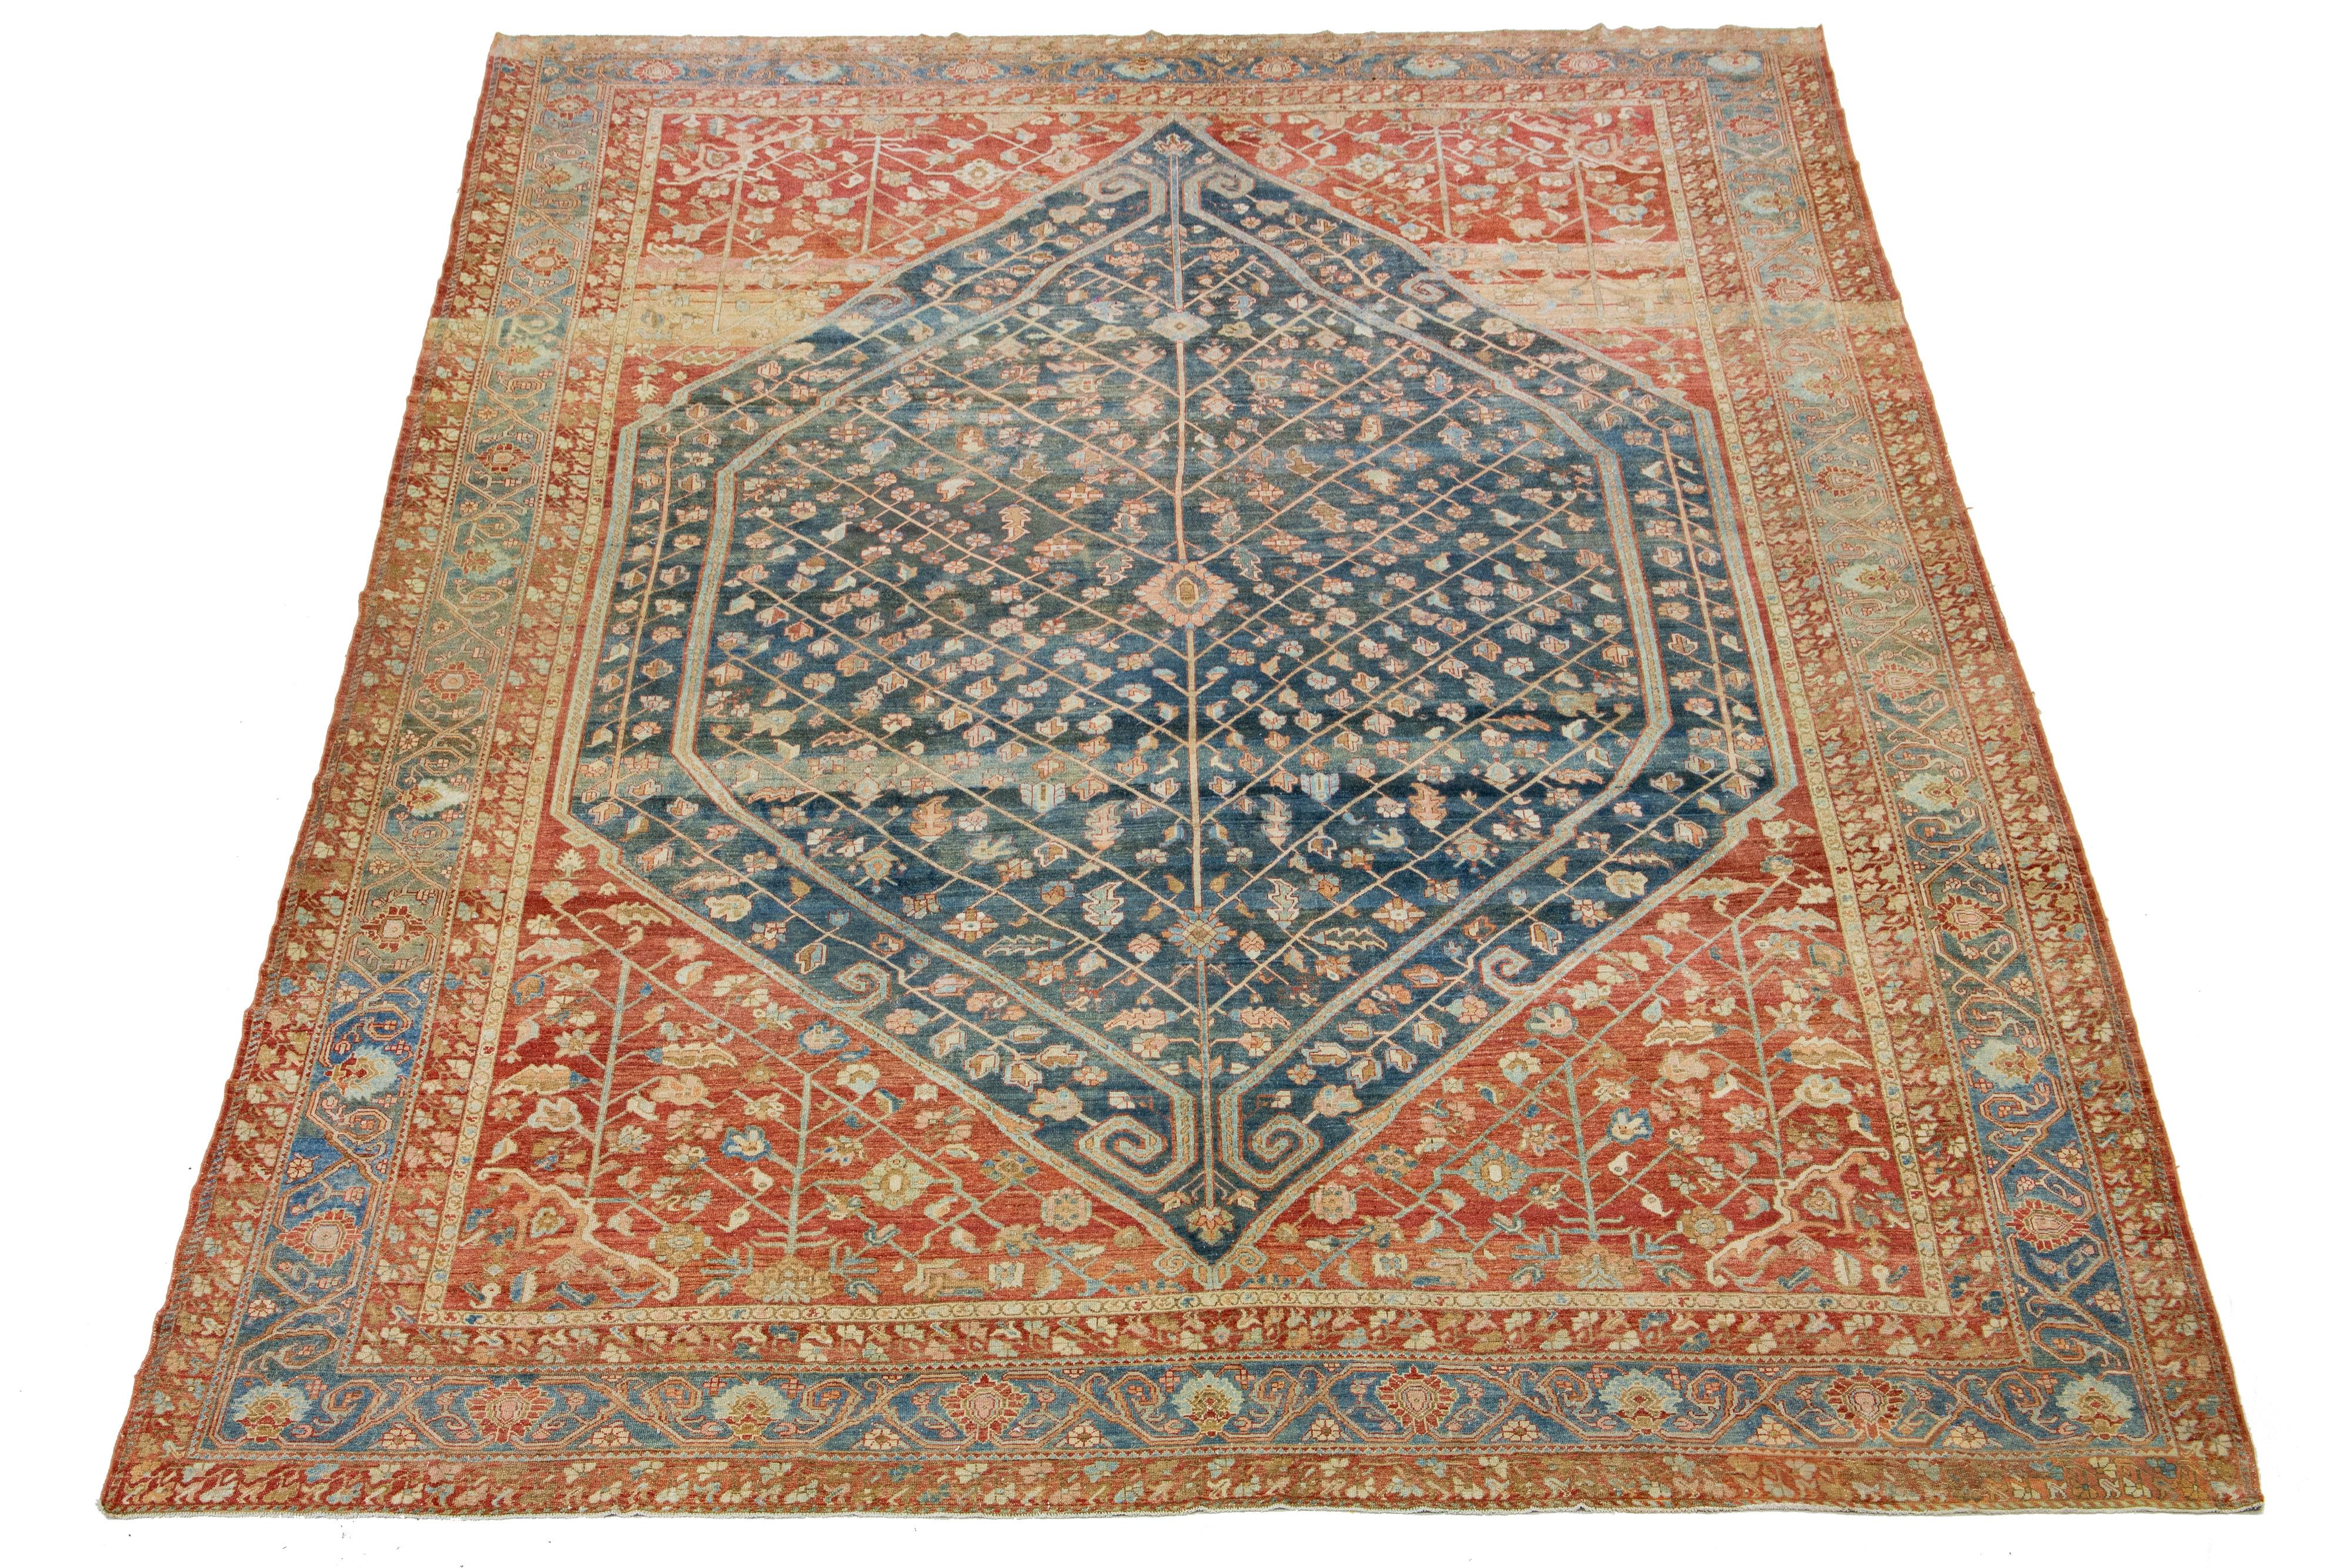 Beautiful Antique Bakhtiari hand-knotted wool rug with a blue color field. This Persian piece has a classic geometric floral design in red-rust and peach colors.

This rug measures 14'9